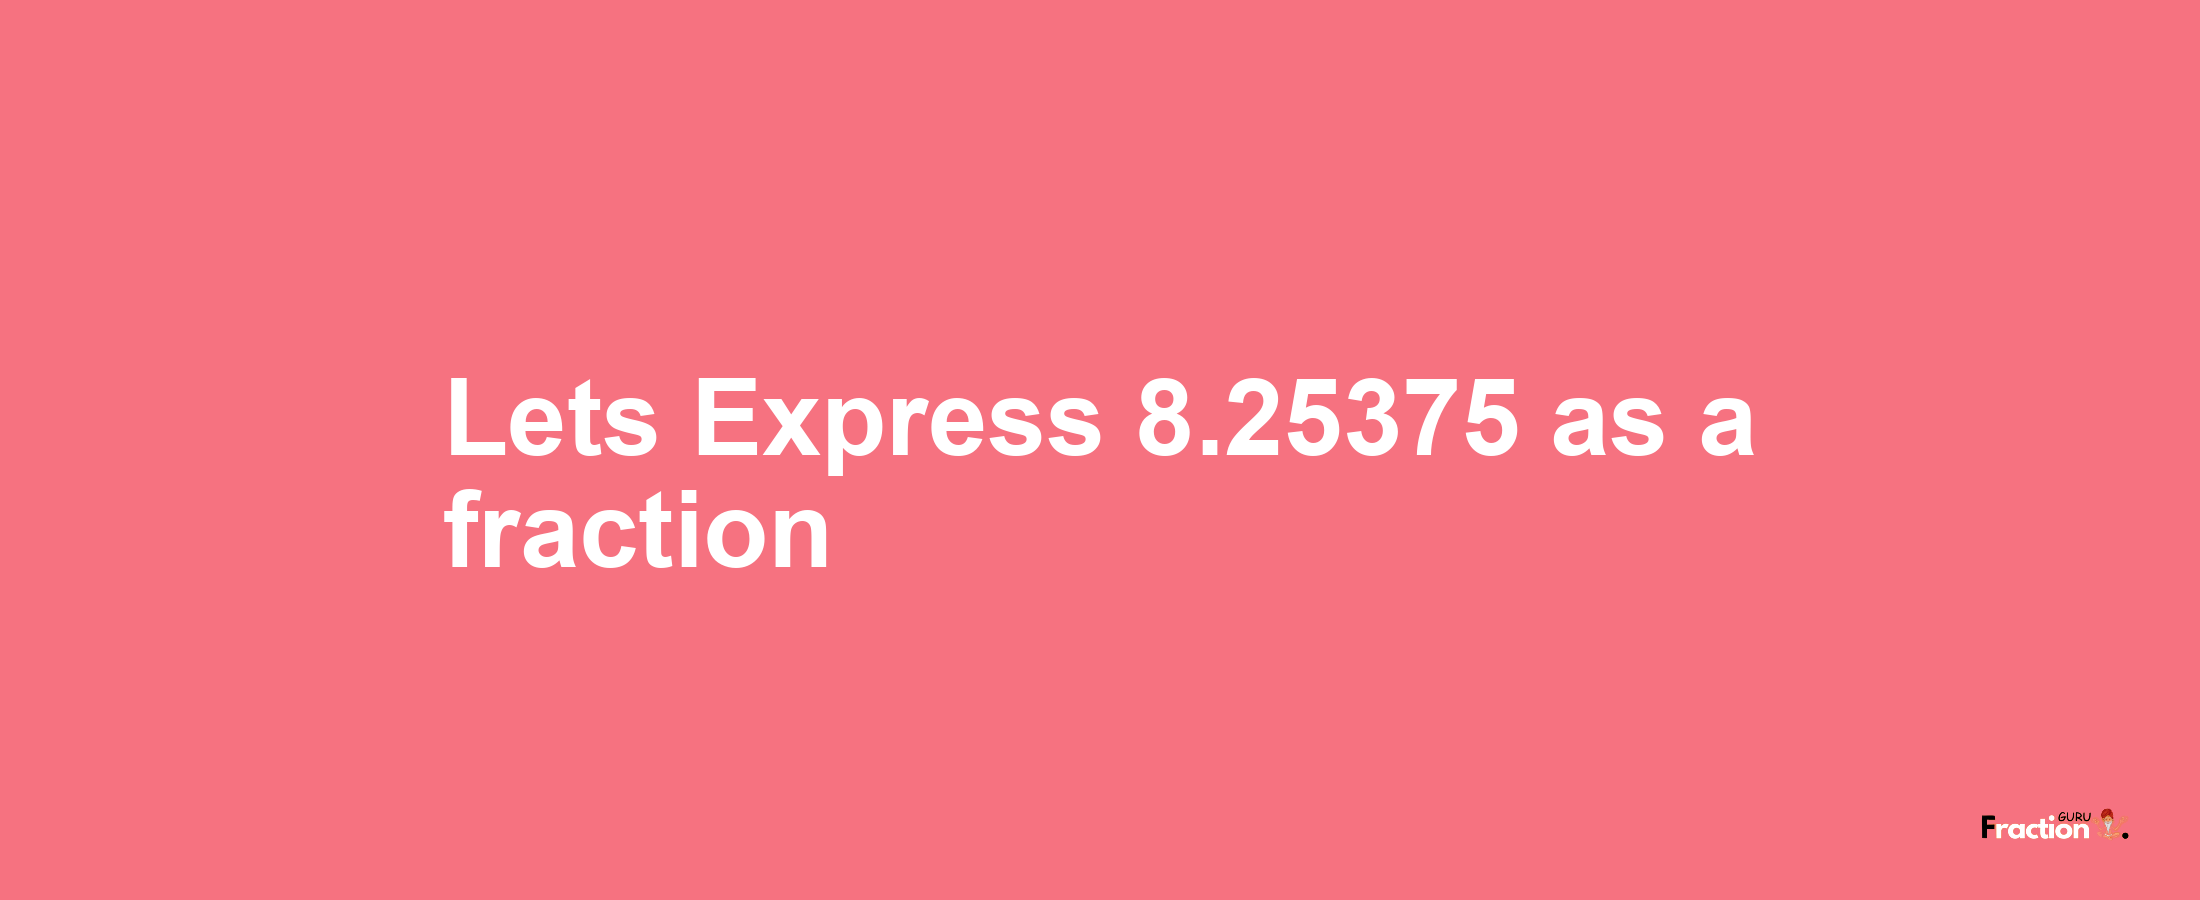 Lets Express 8.25375 as afraction